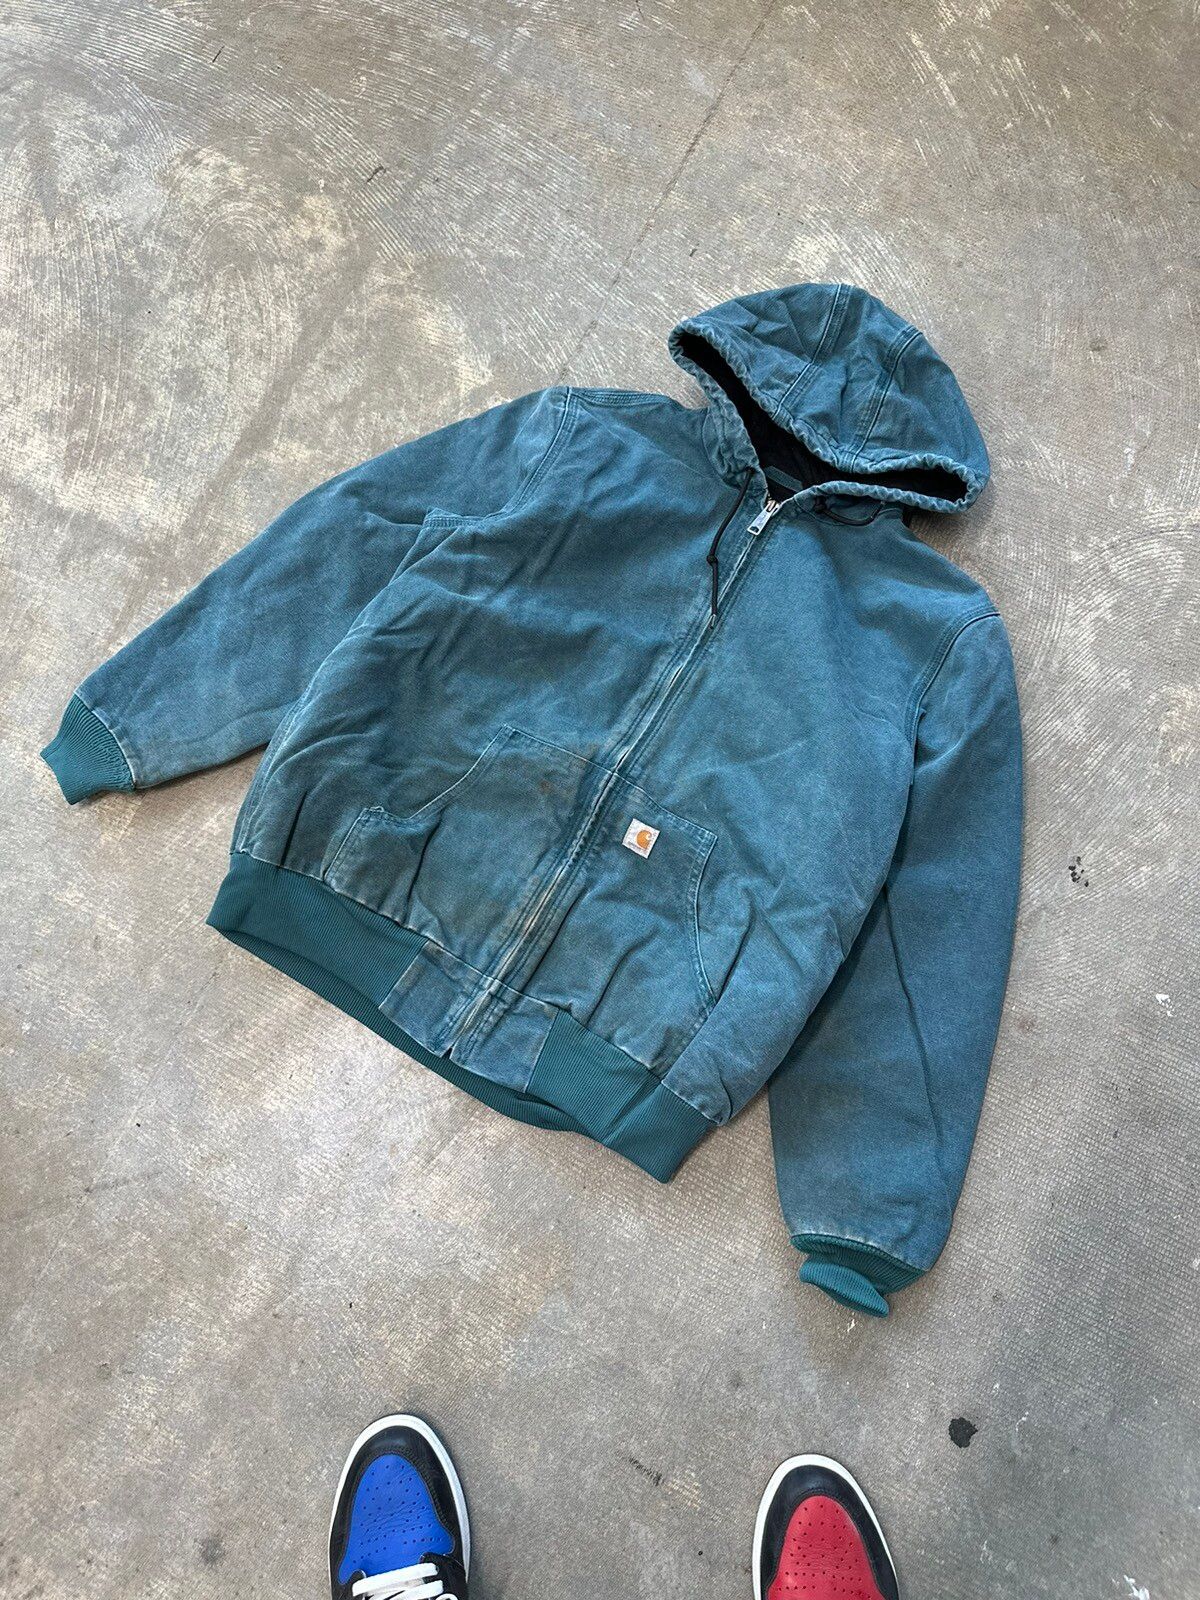 Pre-owned Carhartt X Vintage Vintage90s Carhartt Teal Quilted Active Hooded Jacket